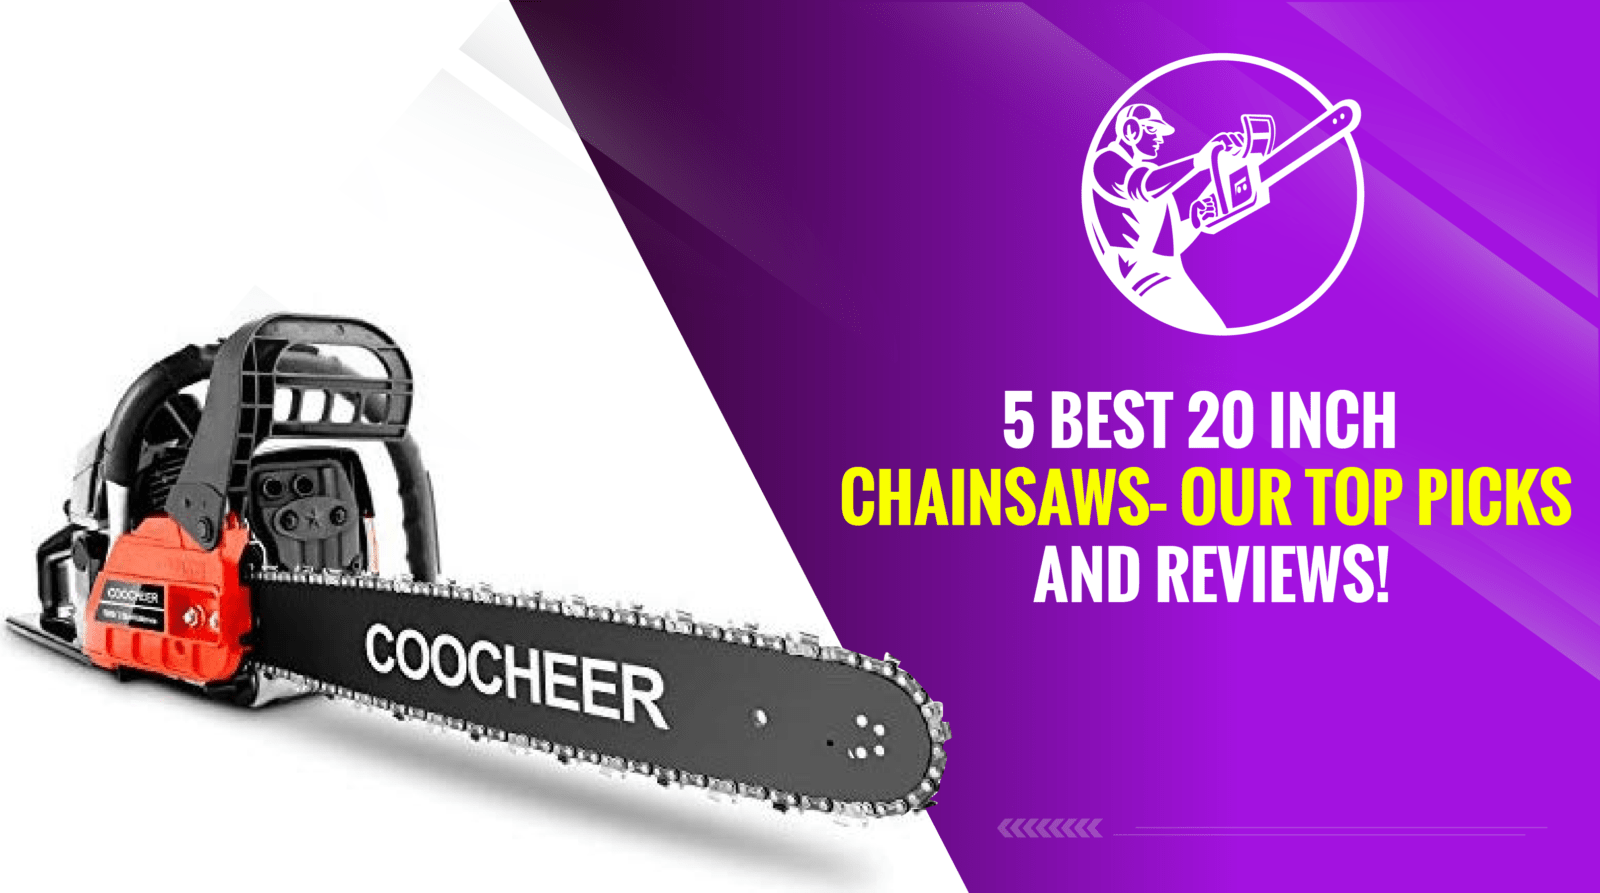 5 Best 20 Inch Chainsaws – Our Top Picks And Reviews!